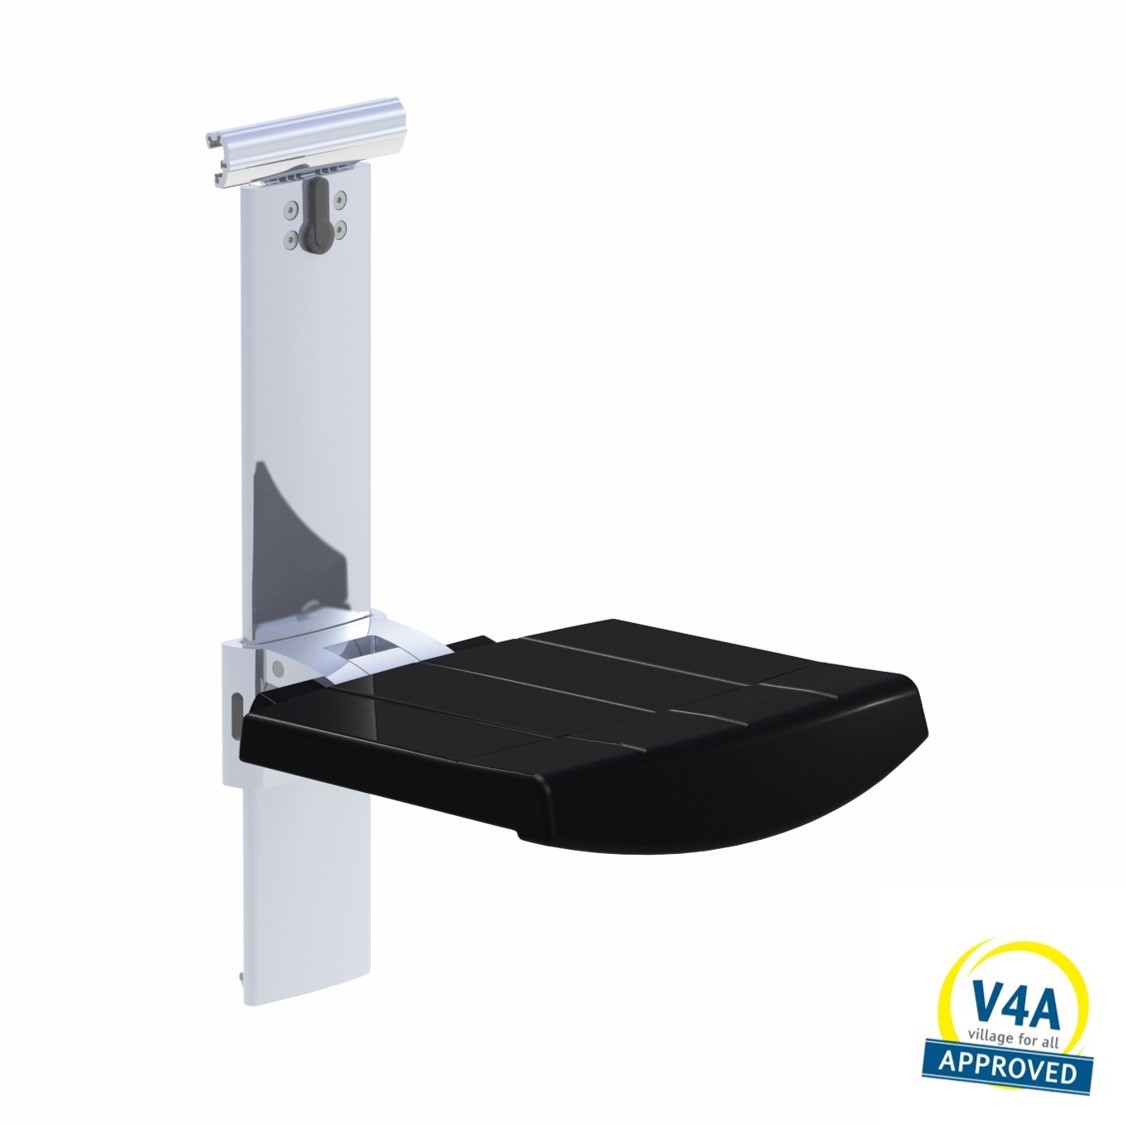 Shower seat for horizontal track height and sideways adjustable